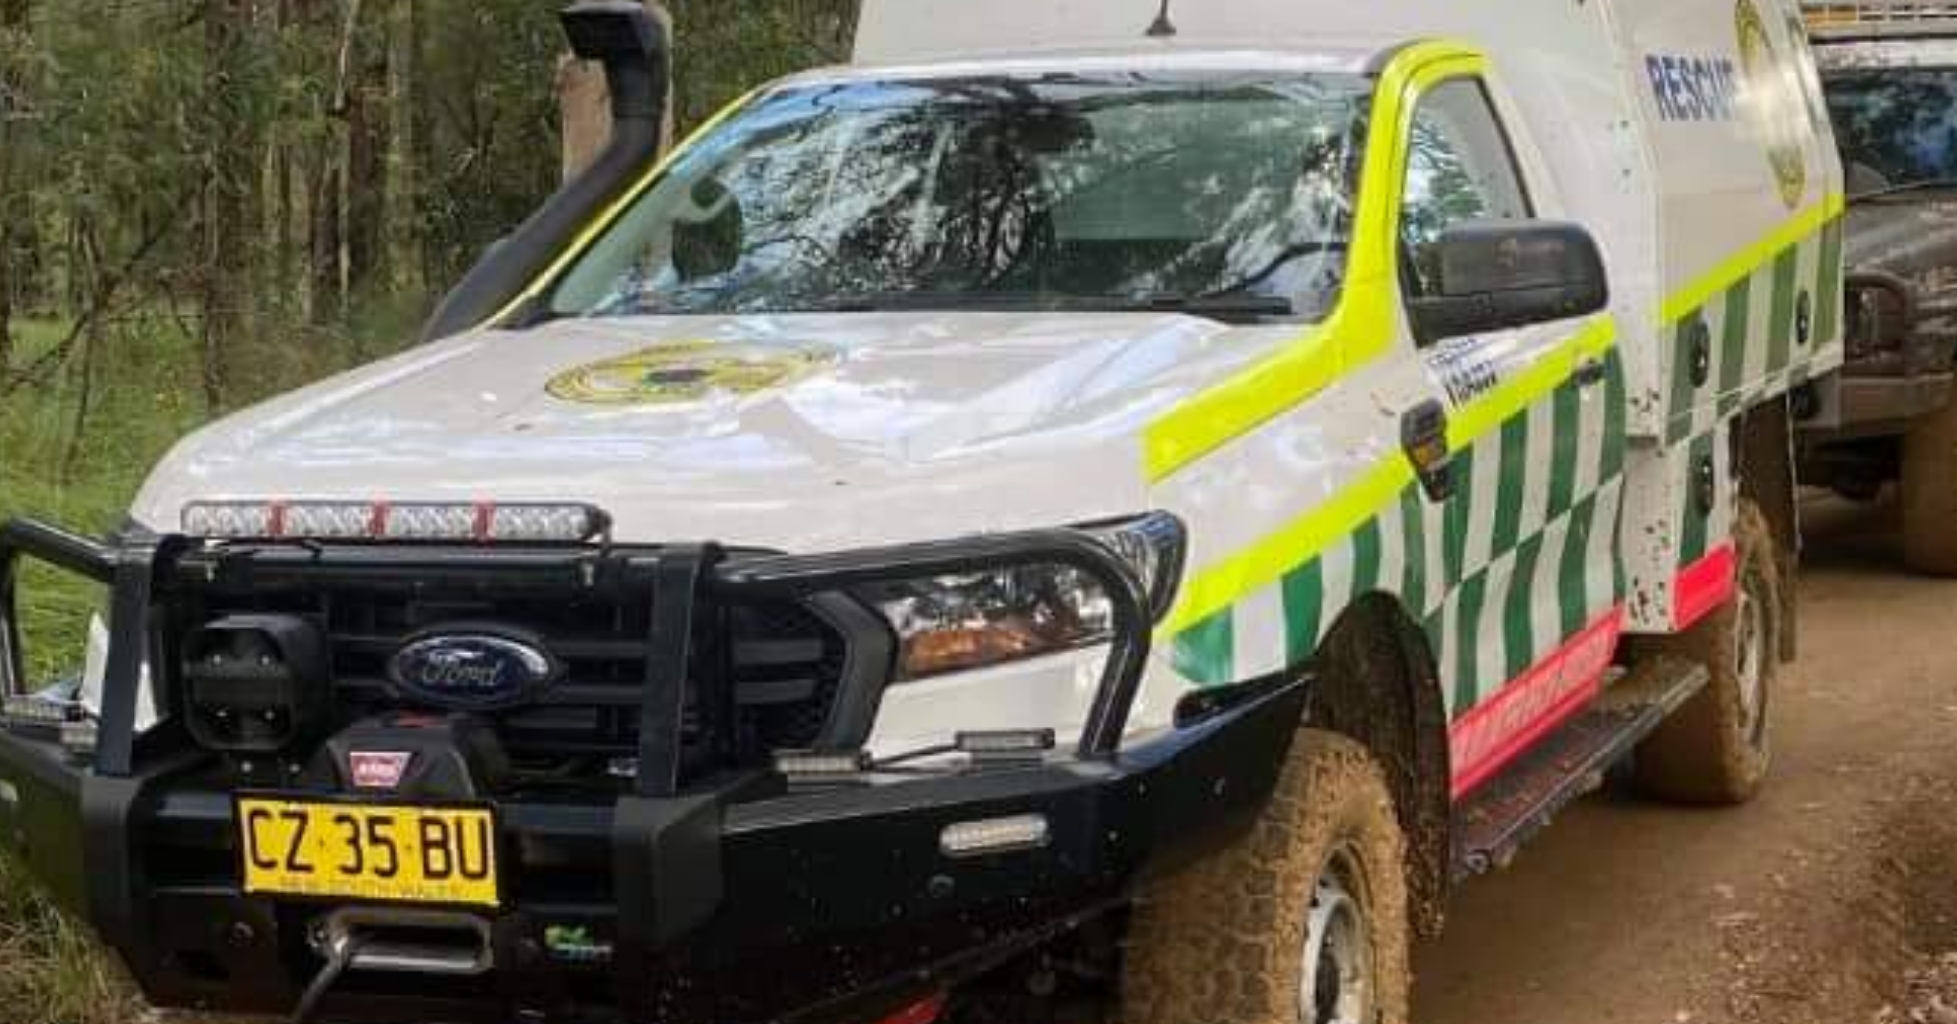 Read more about the article MAN TREATED FOR SEVERELY INJURED FINGERS NEAR CESSNOCK